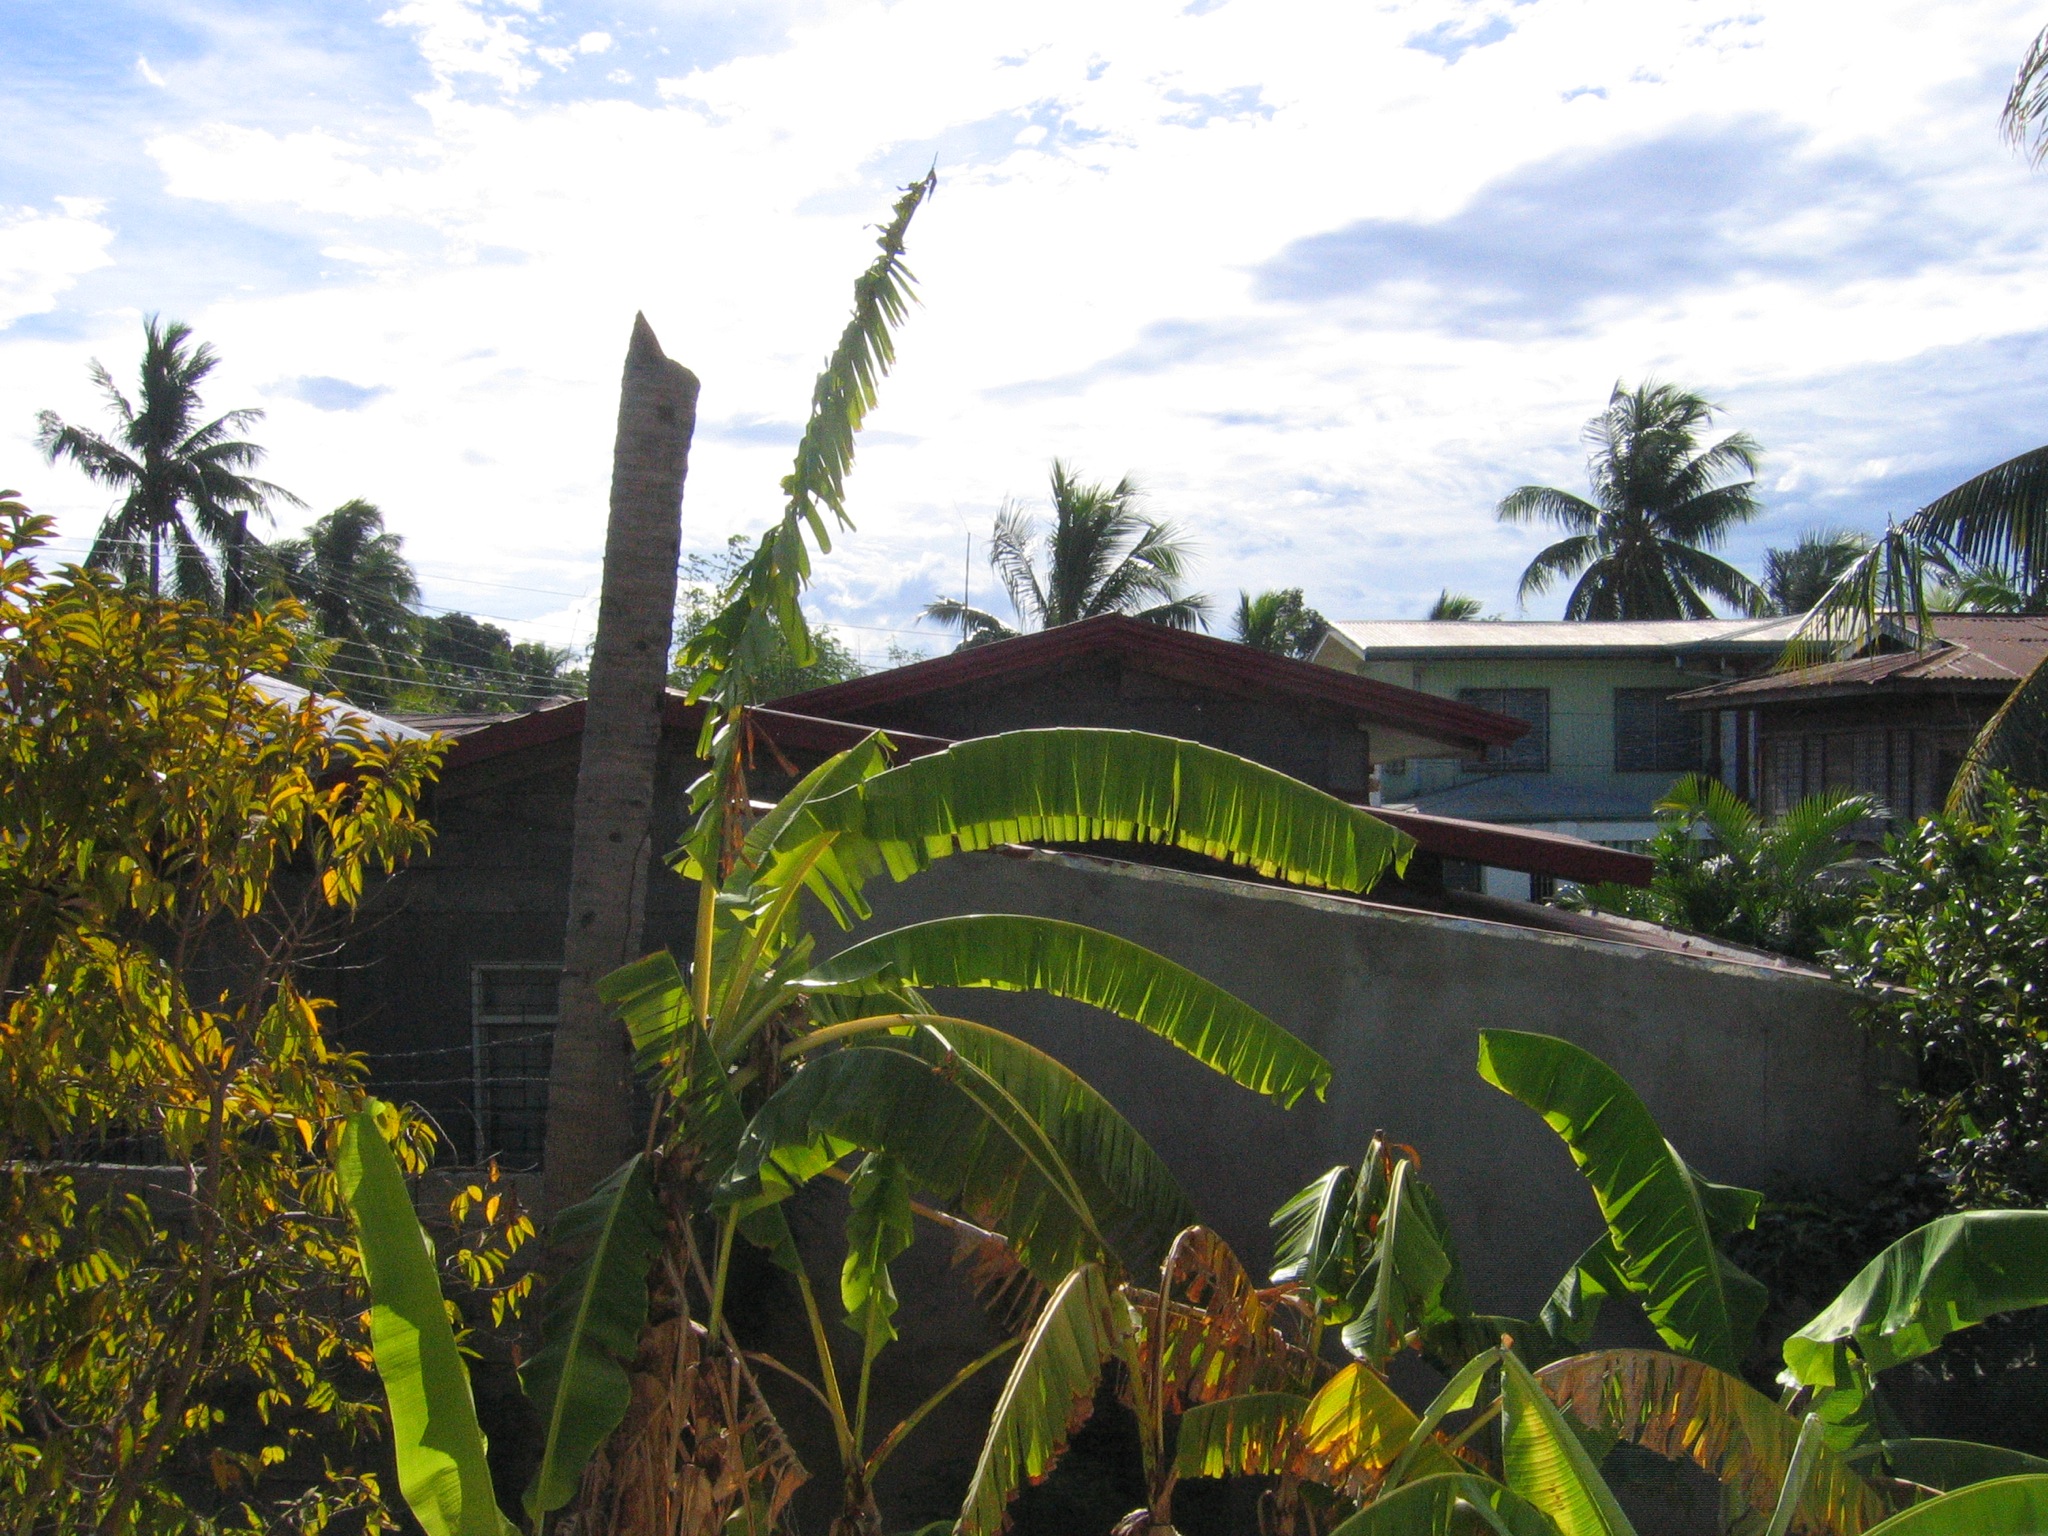 the back of some houses with palm trees